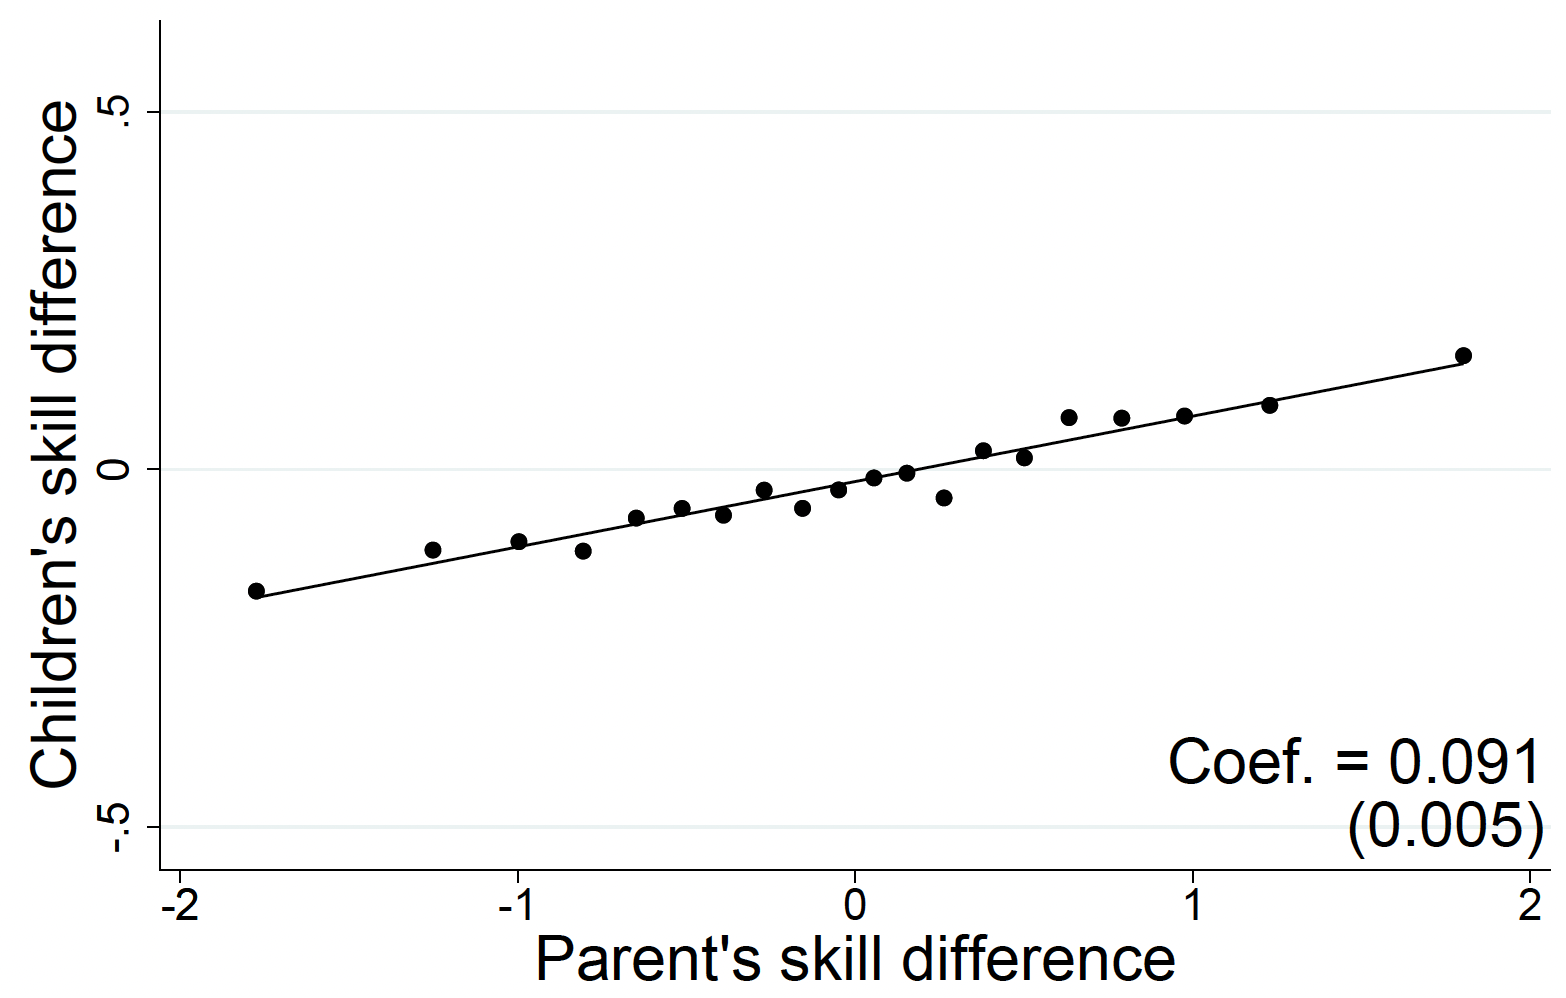 The intergenerational transmission of cognitive skills 3